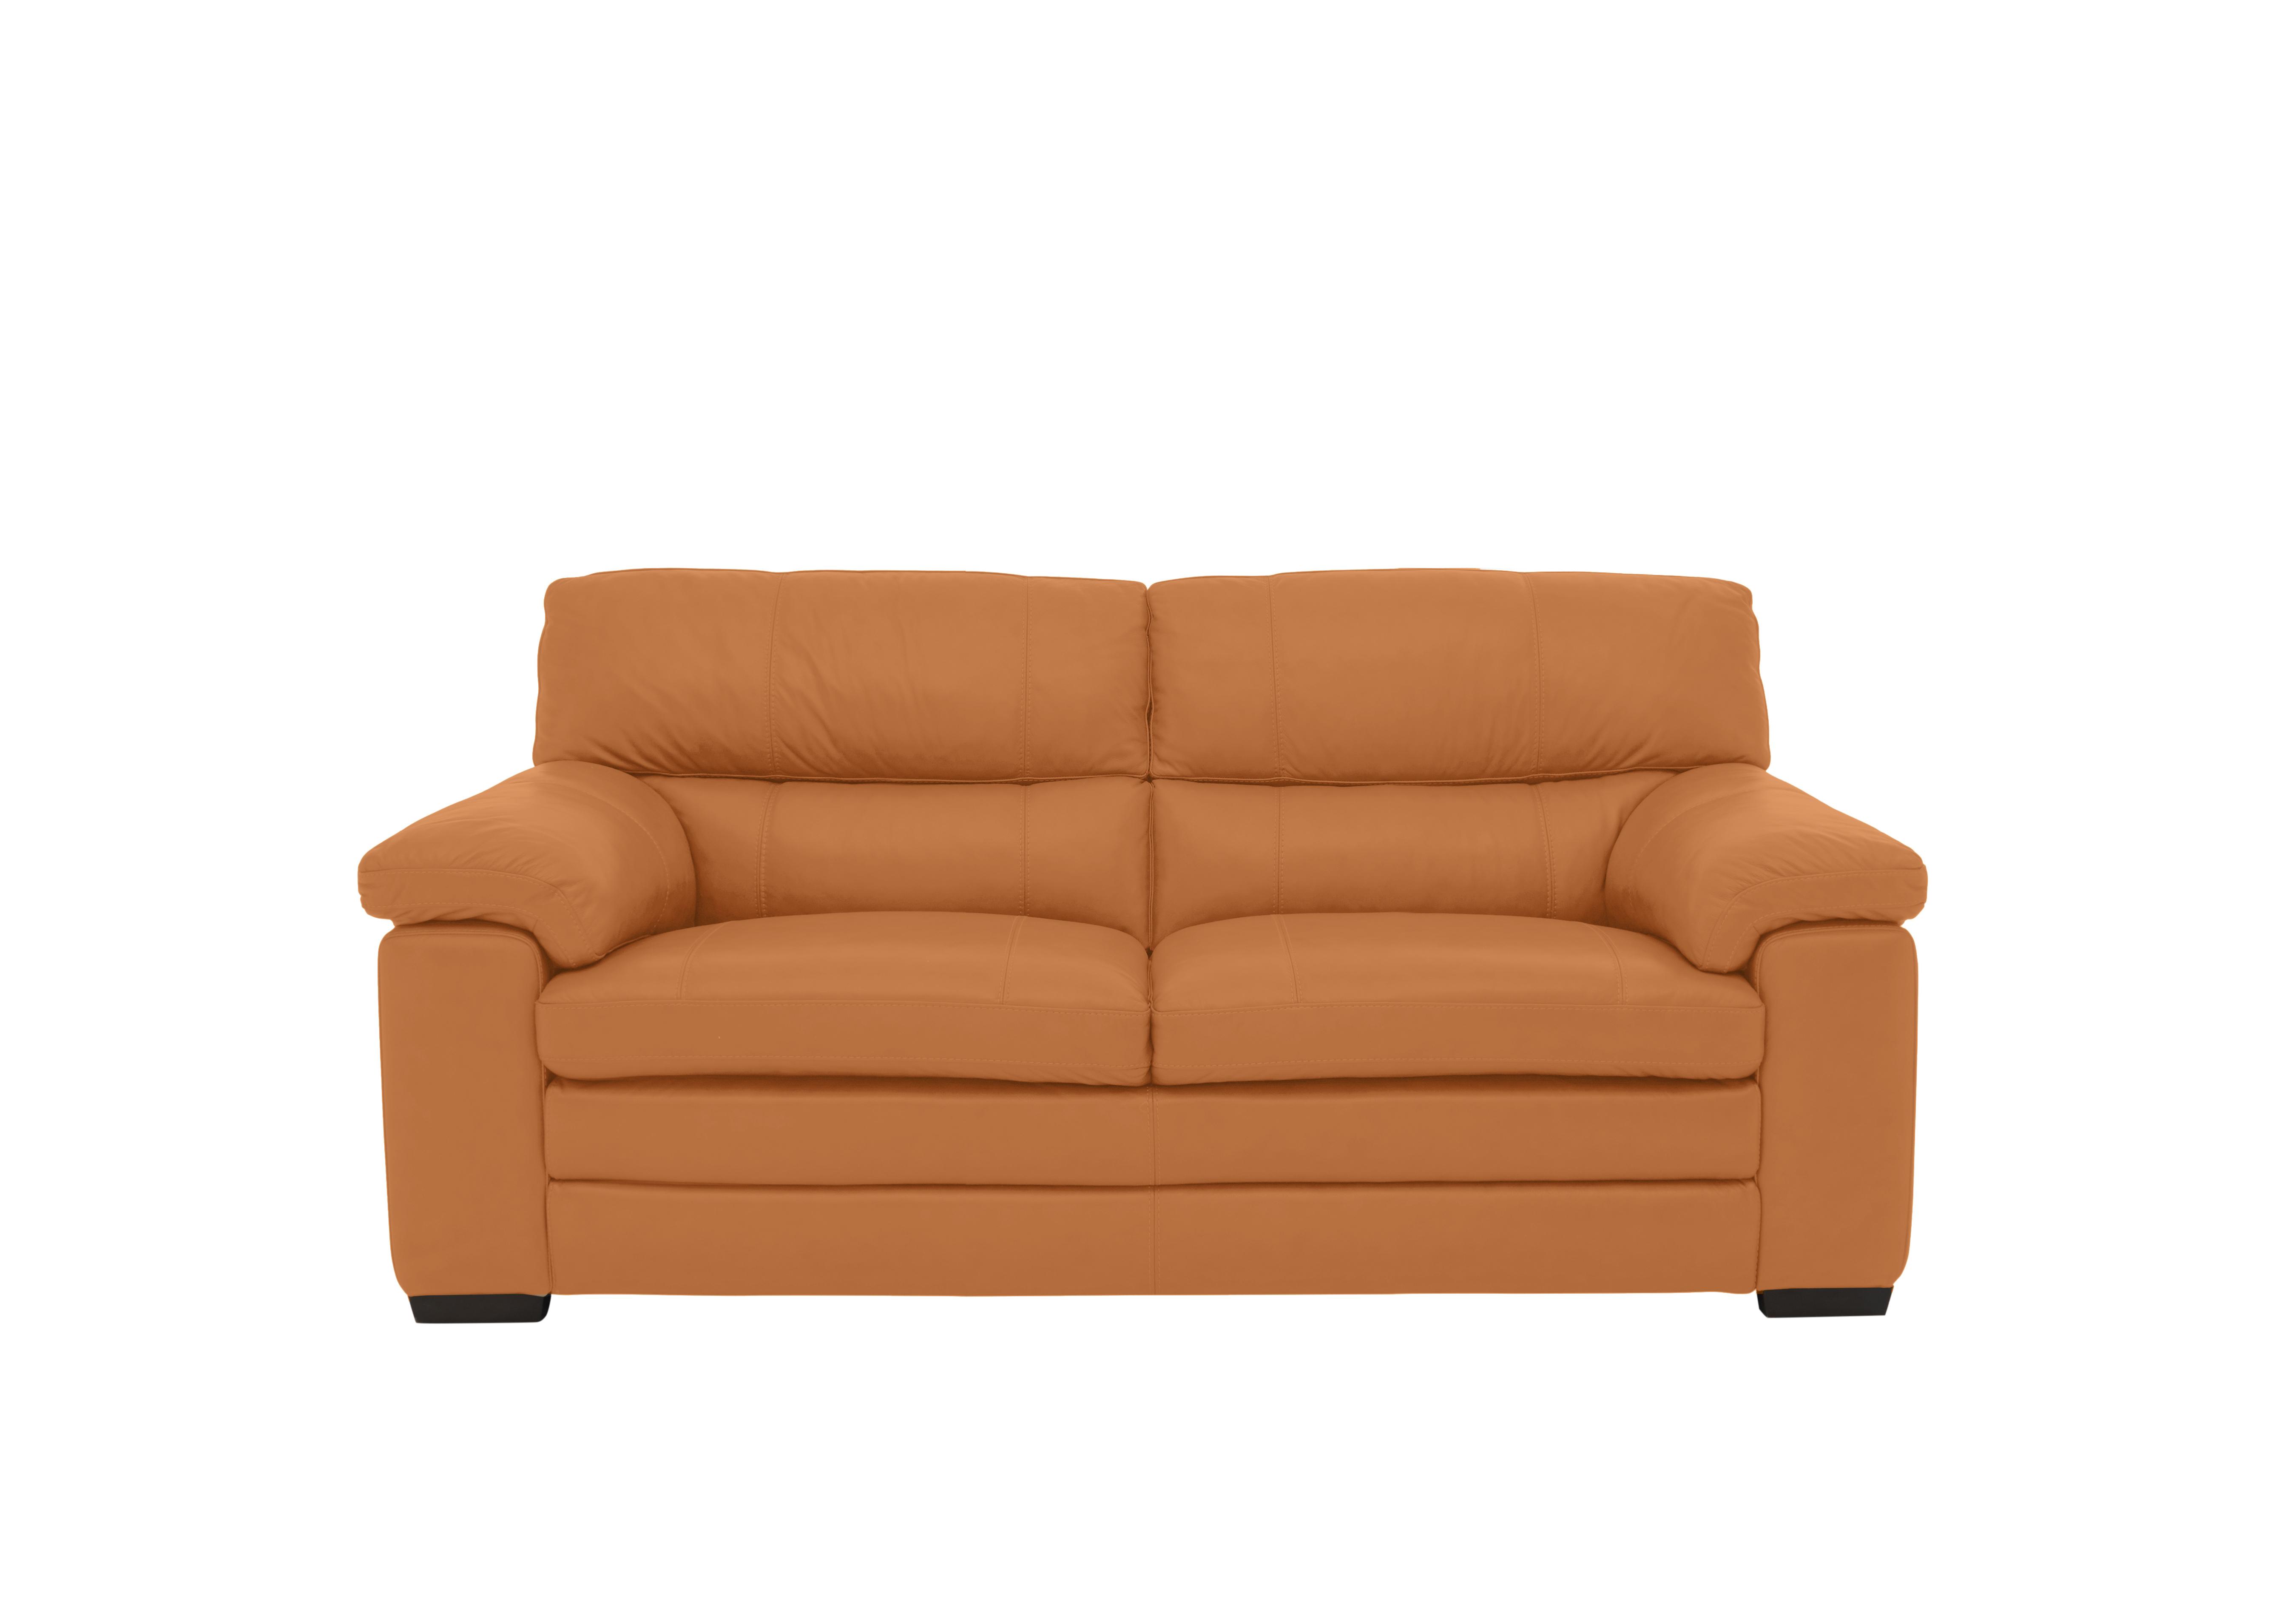 Cozee 2 Seater Pure Premium Leather Sofa in Bv-335e Honey Yellow on Furniture Village